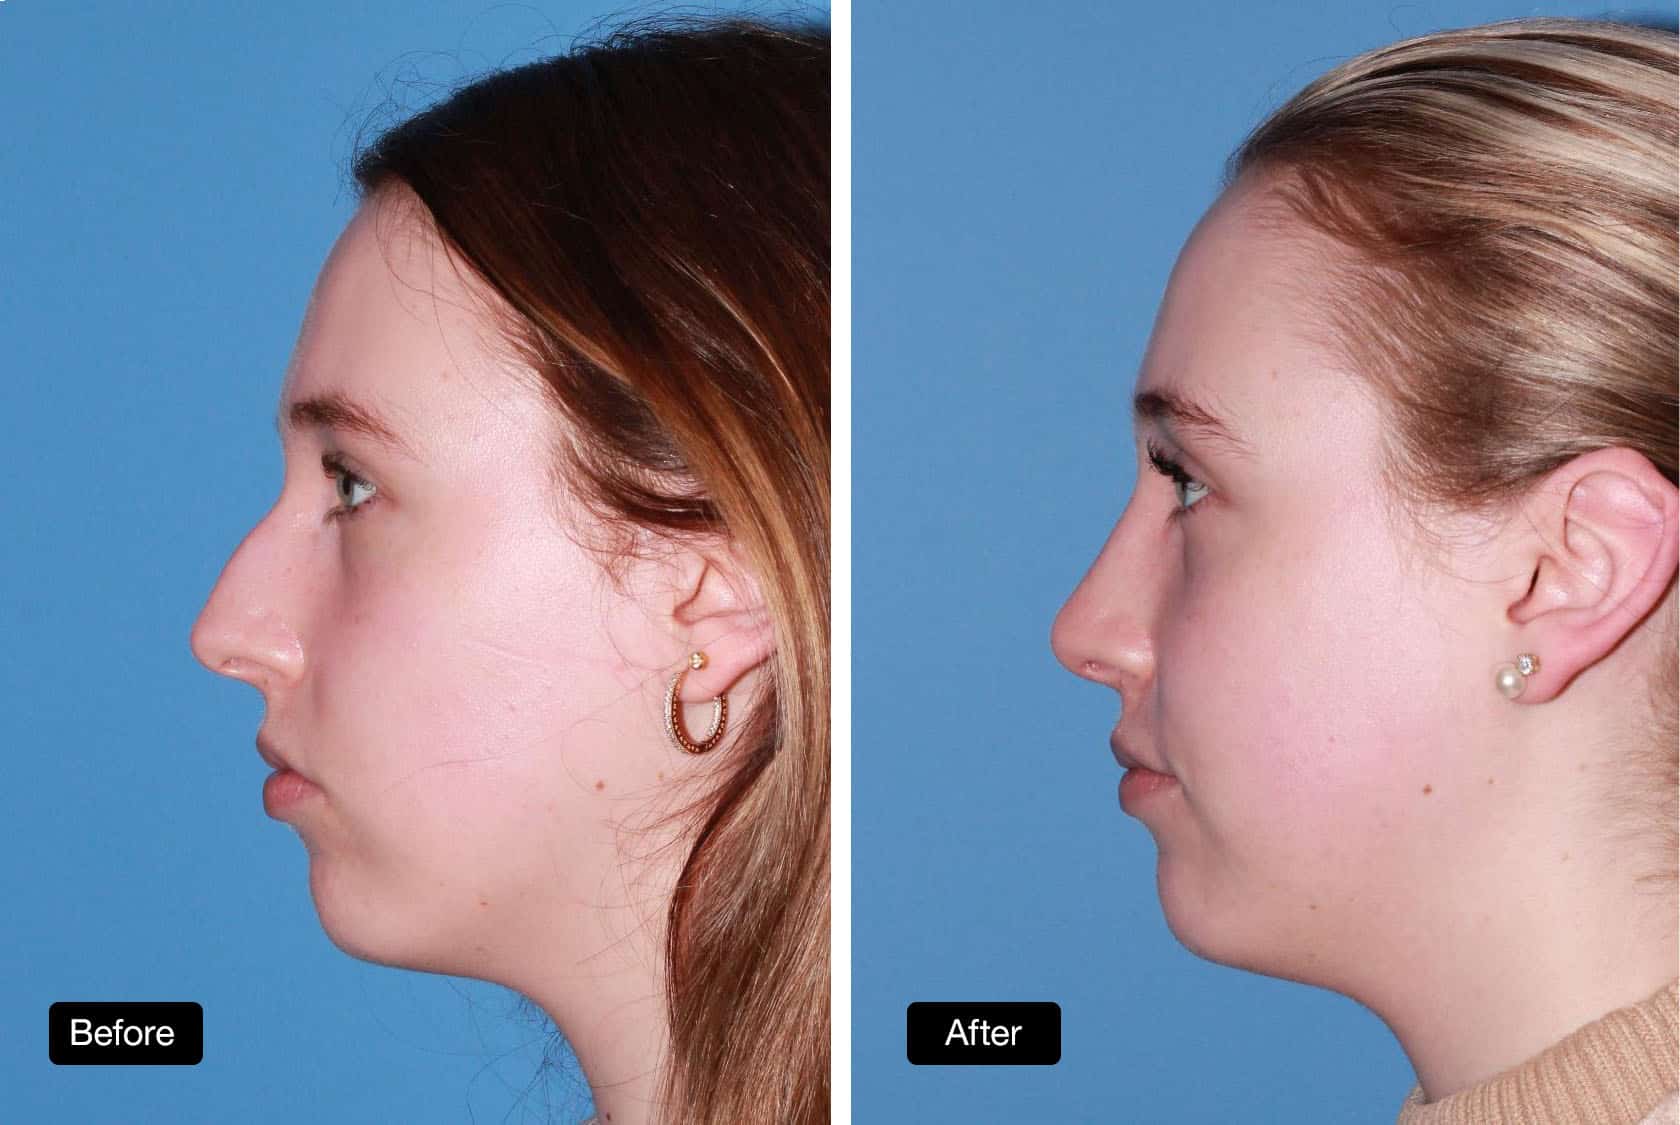 Rhinoplasty - Patient Before and After: 23 year old patient with dorsal reduction and tip refinement (1)